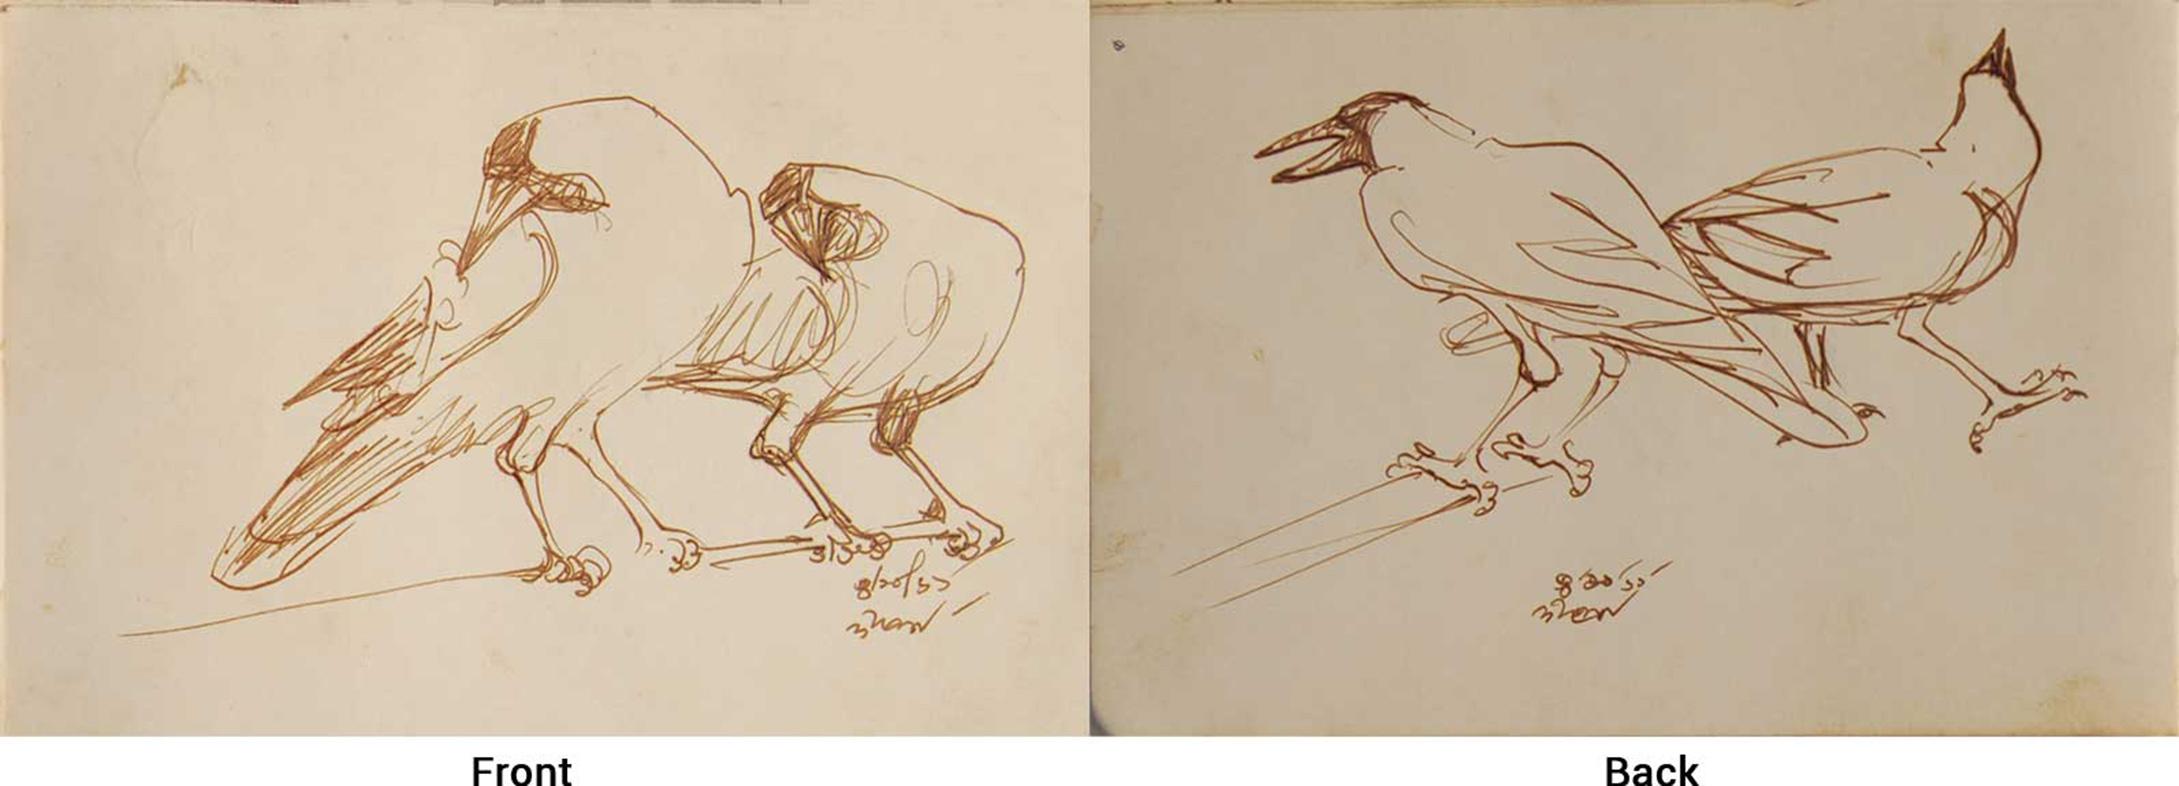 Dipen Bose Animal Art - Crows Series, Watercolour on paper, Rare Art by Indian Bengal Artist "In Stock"